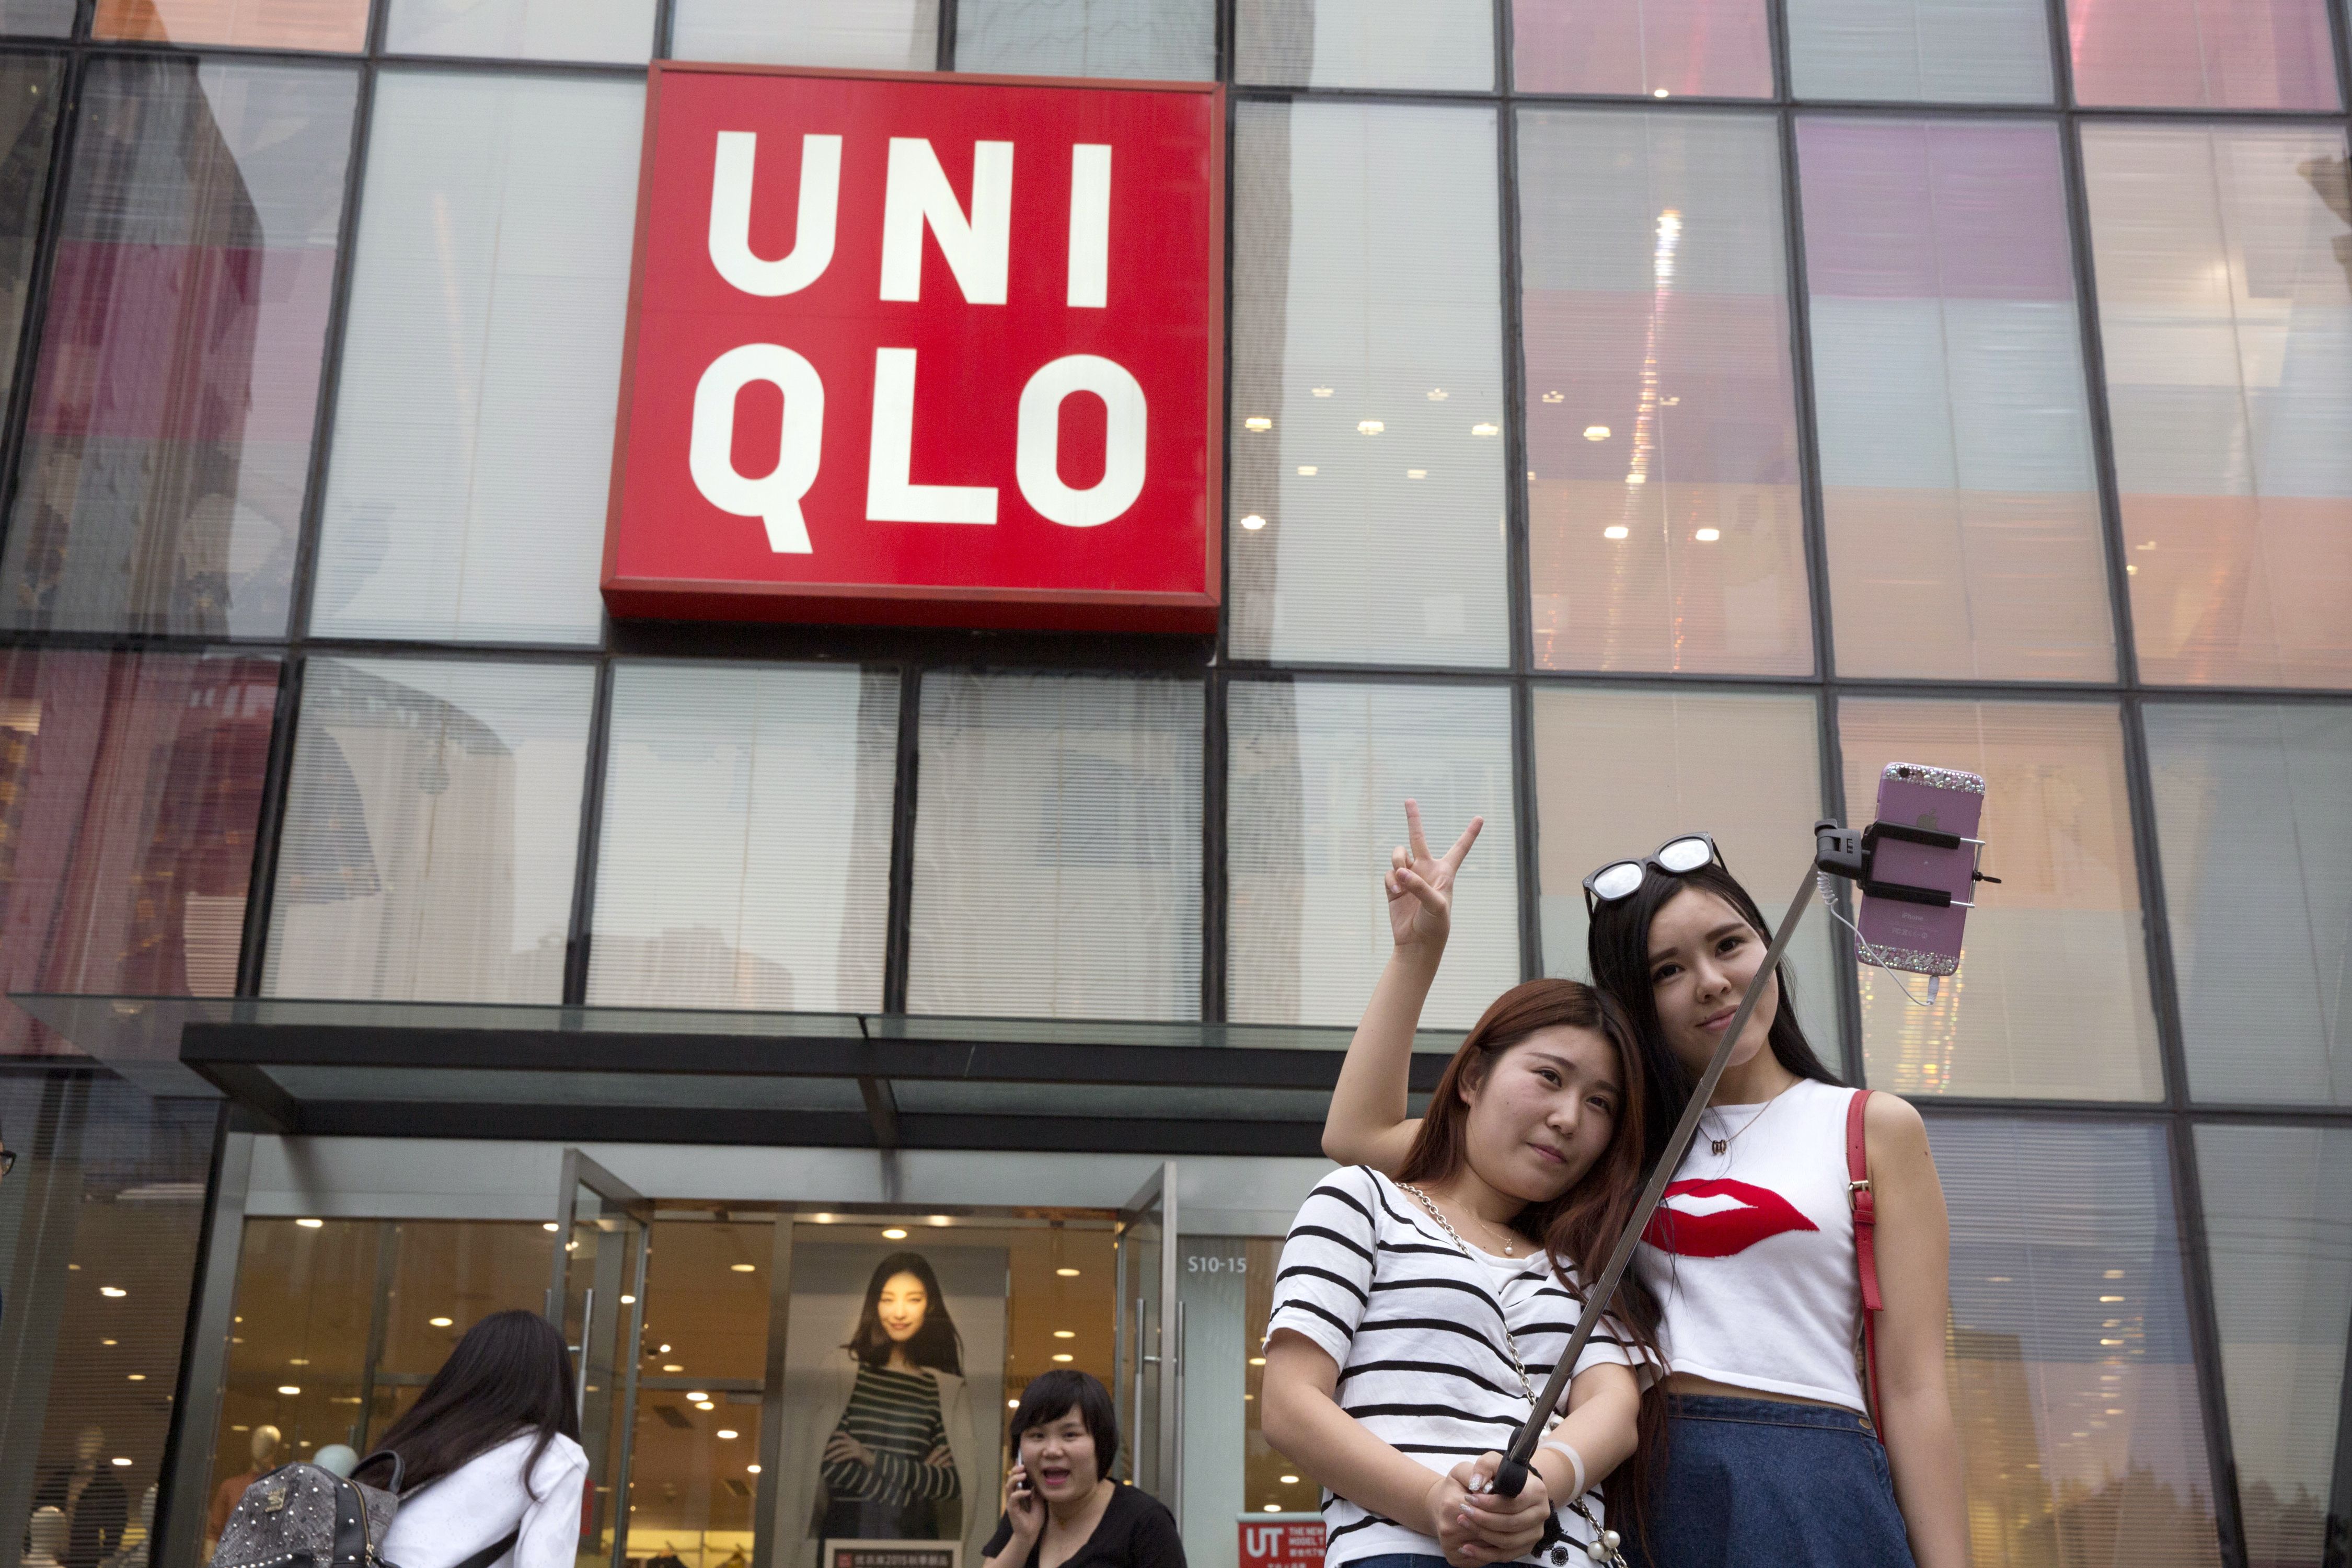 Chinese Having Sex - China police detain Uniqlo sex video suspects | CNN